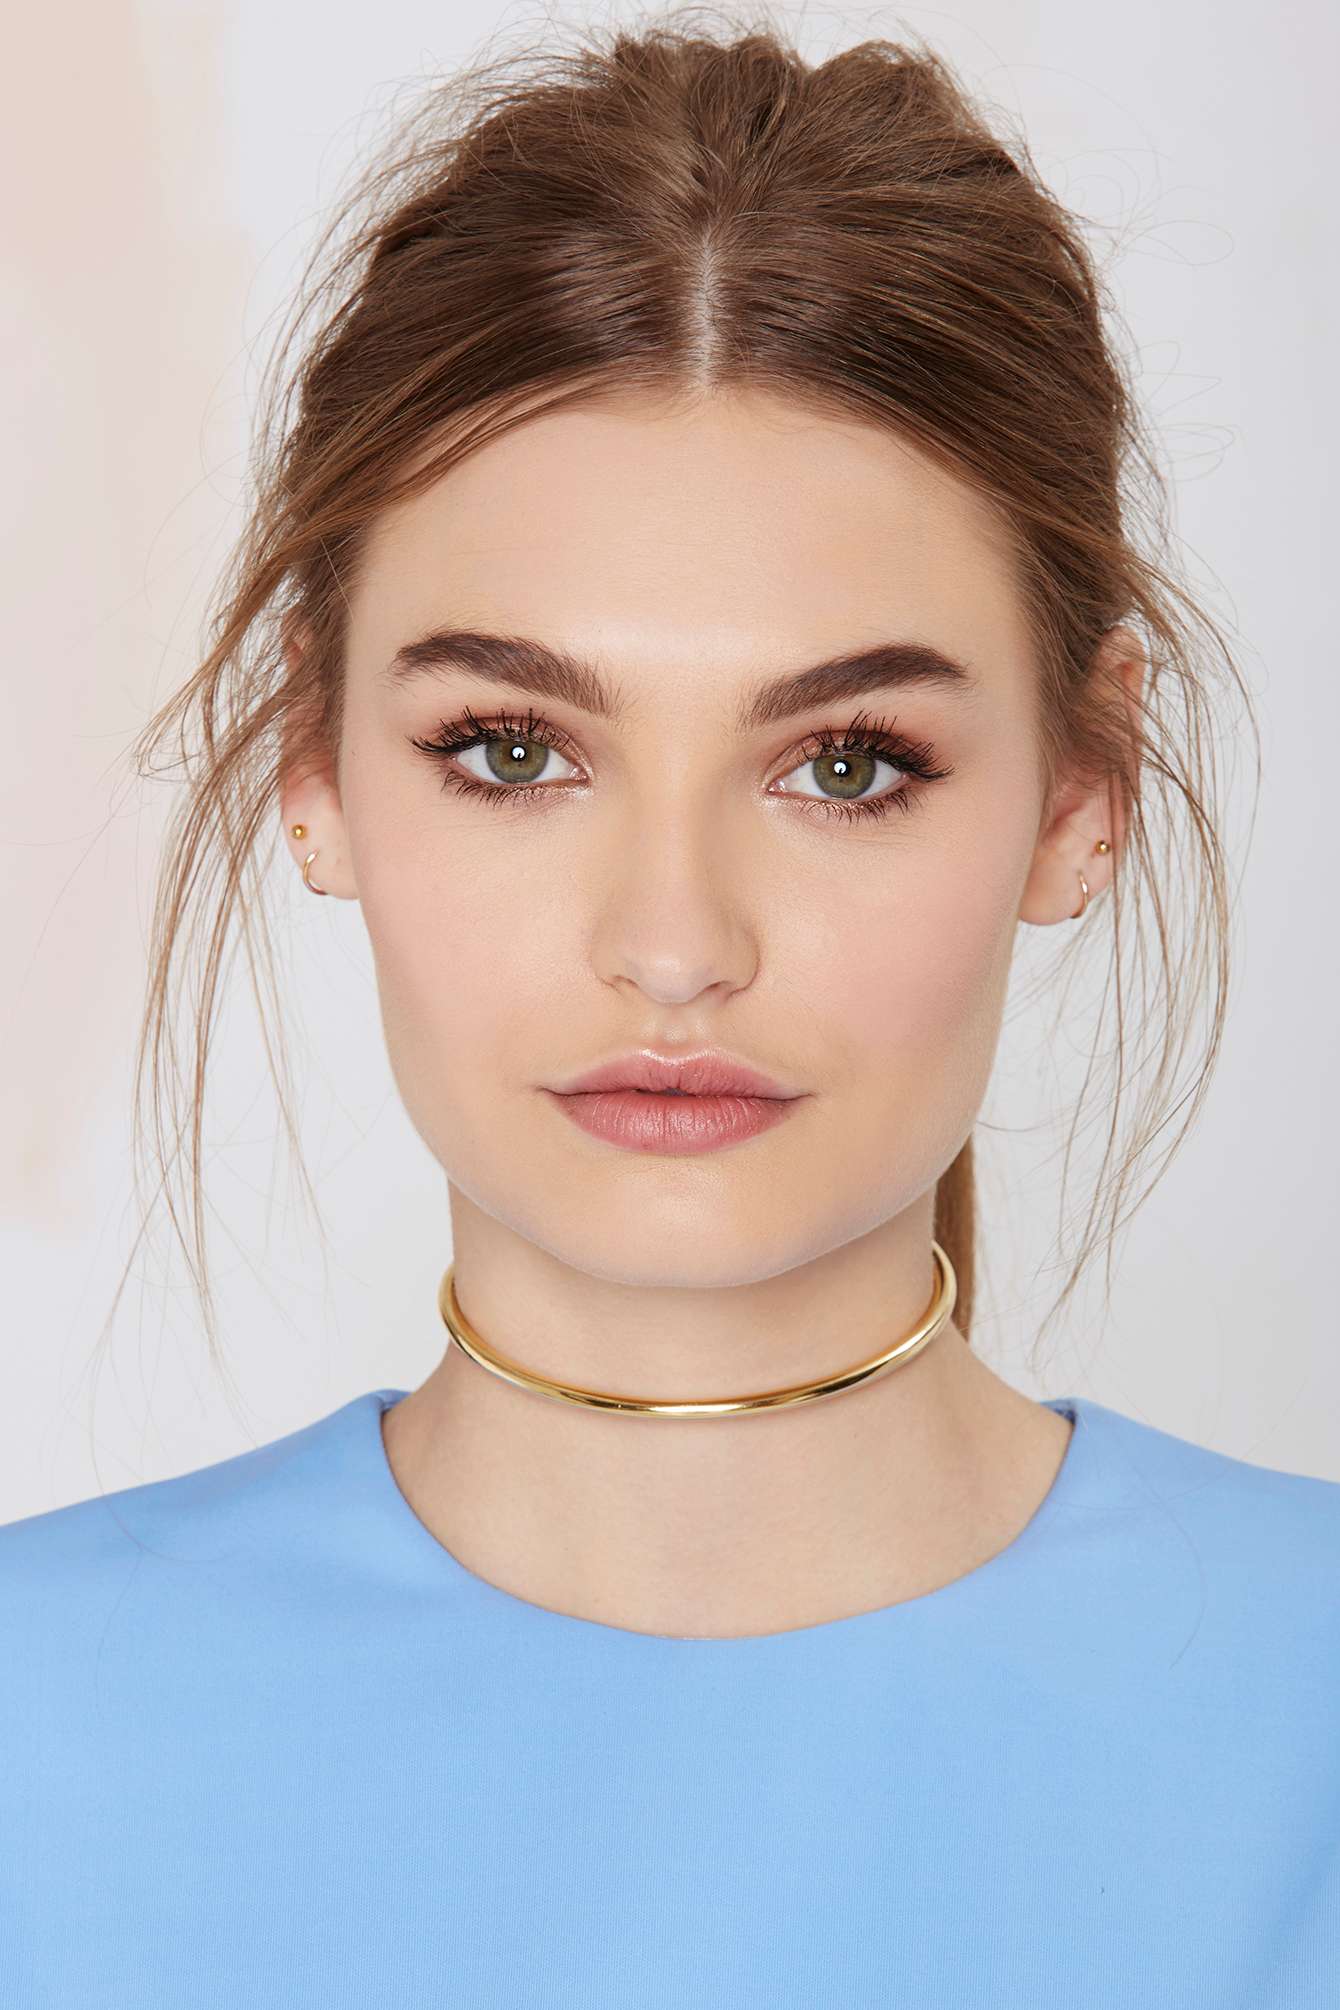 A Short History of Chokers - HubPages